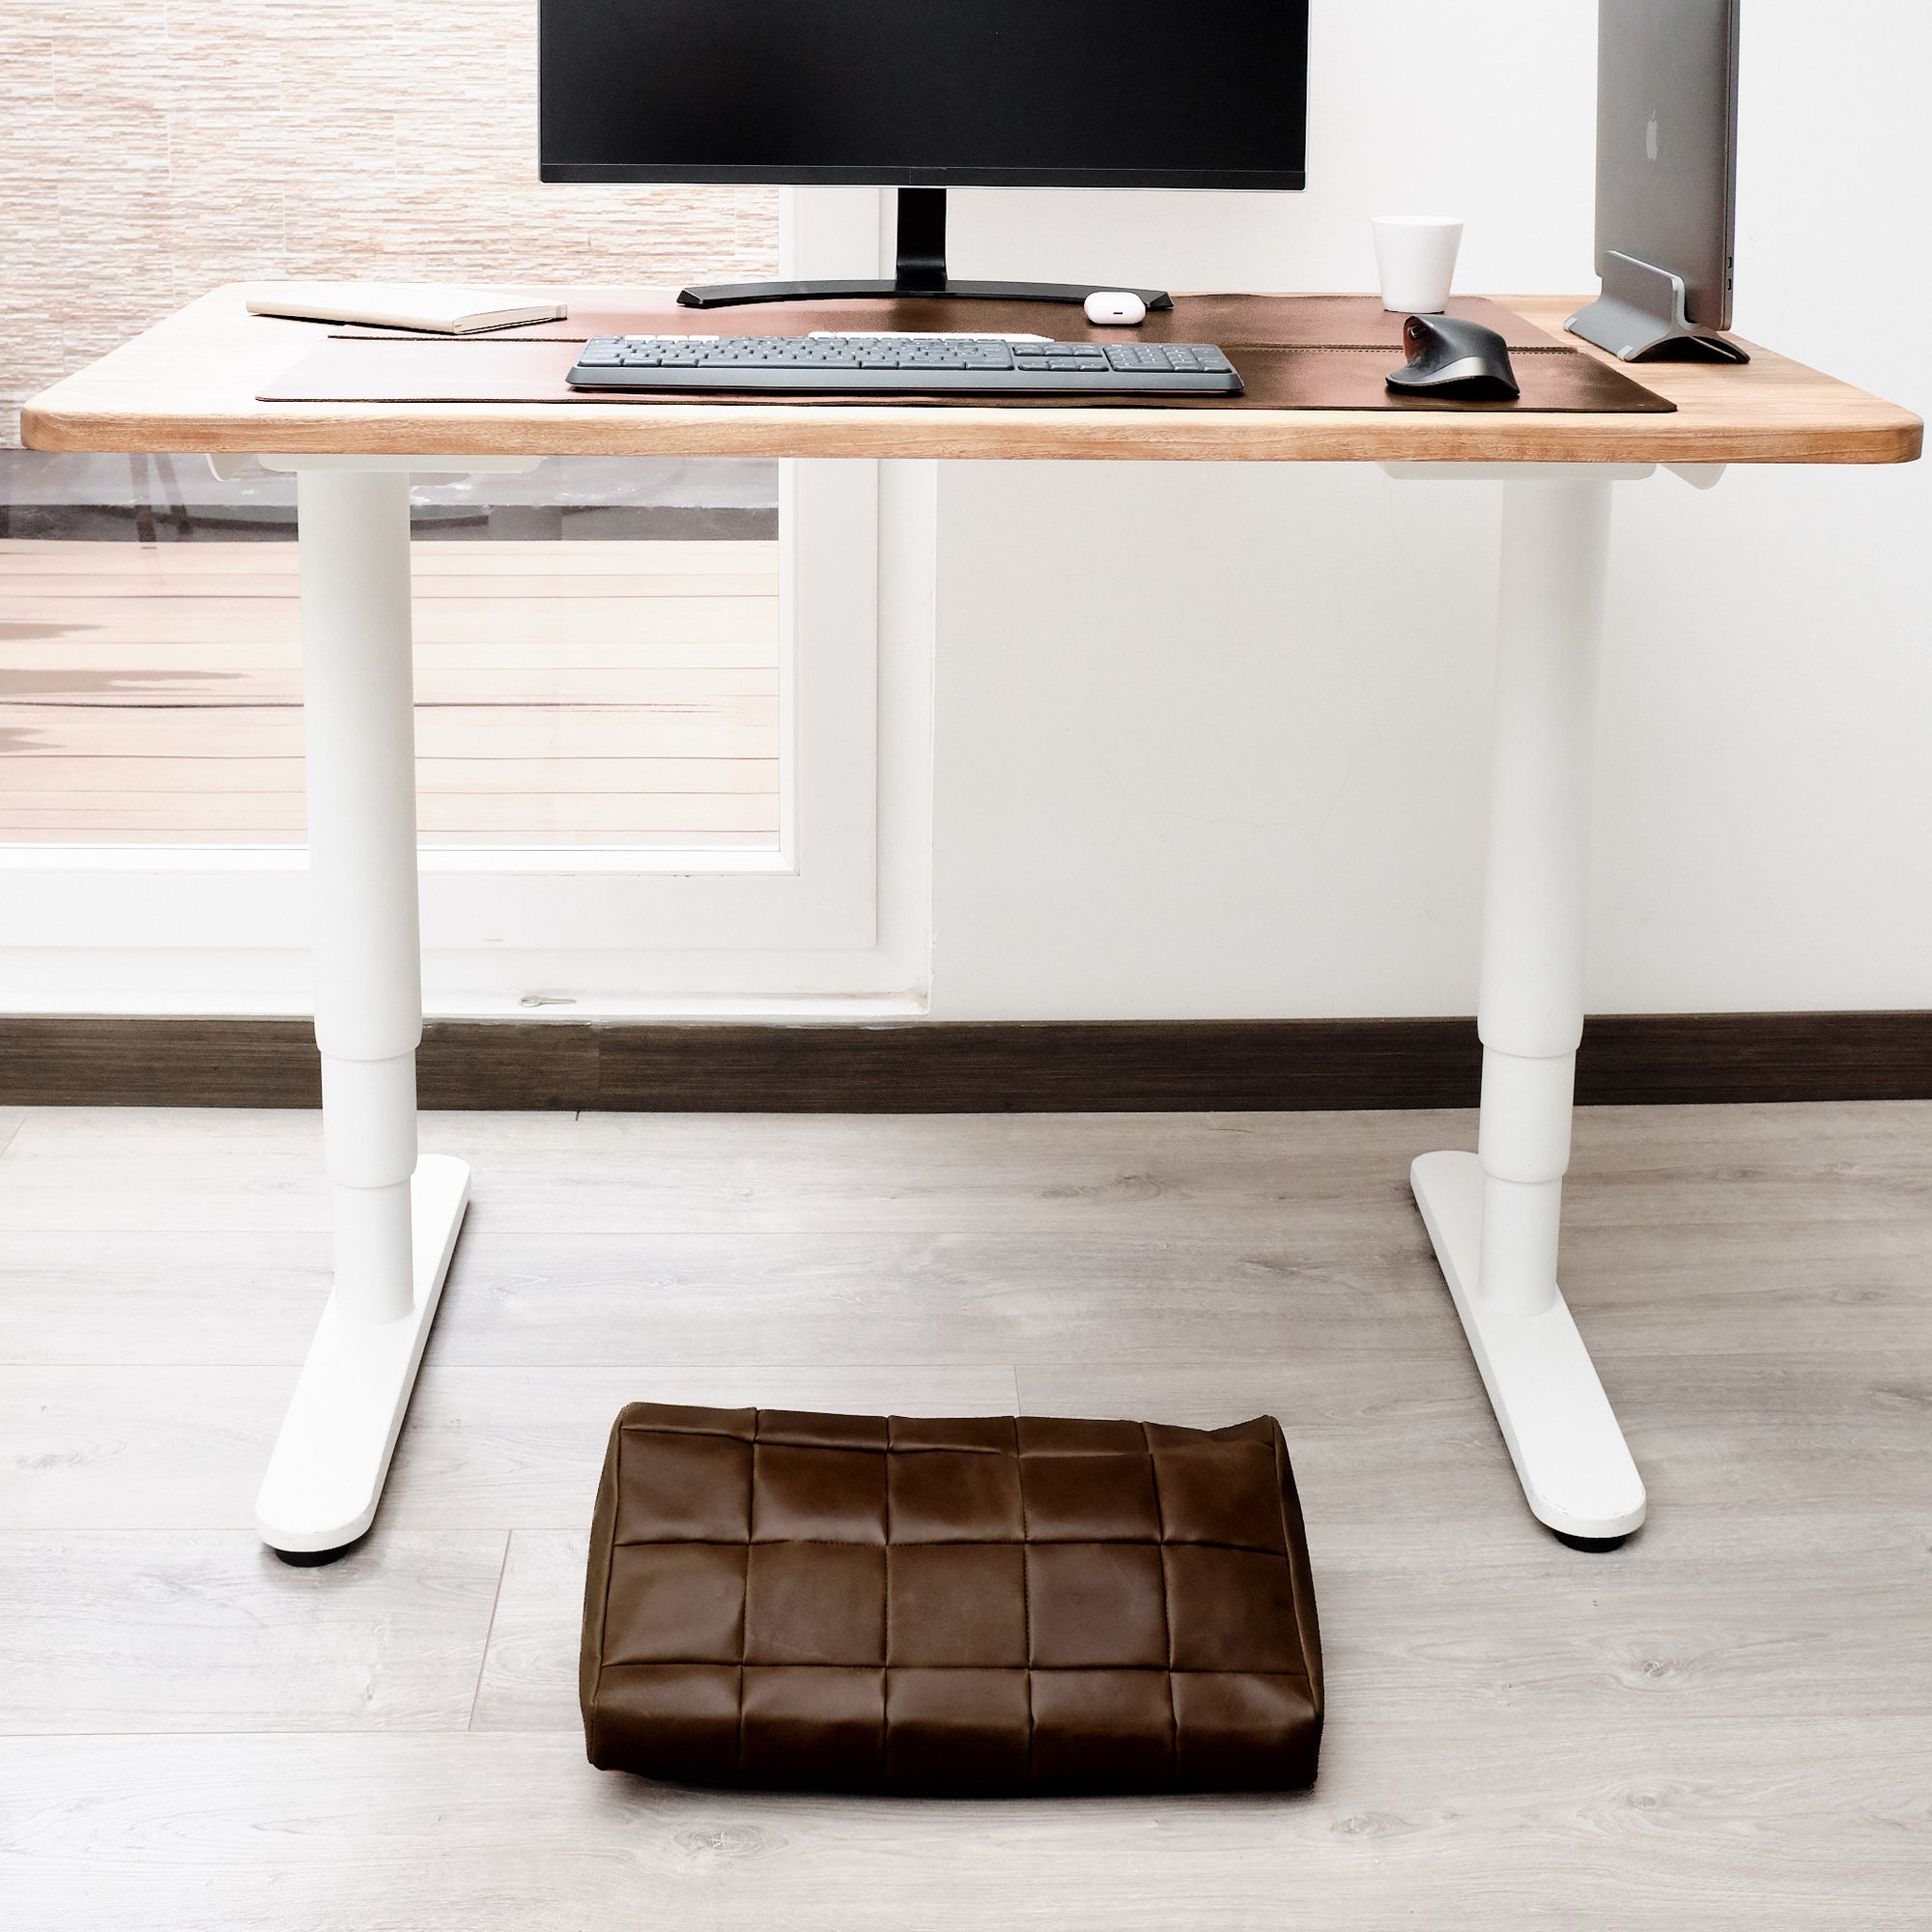 Cover. Ergonomic under desk footrest cover in brown by Capra Leather